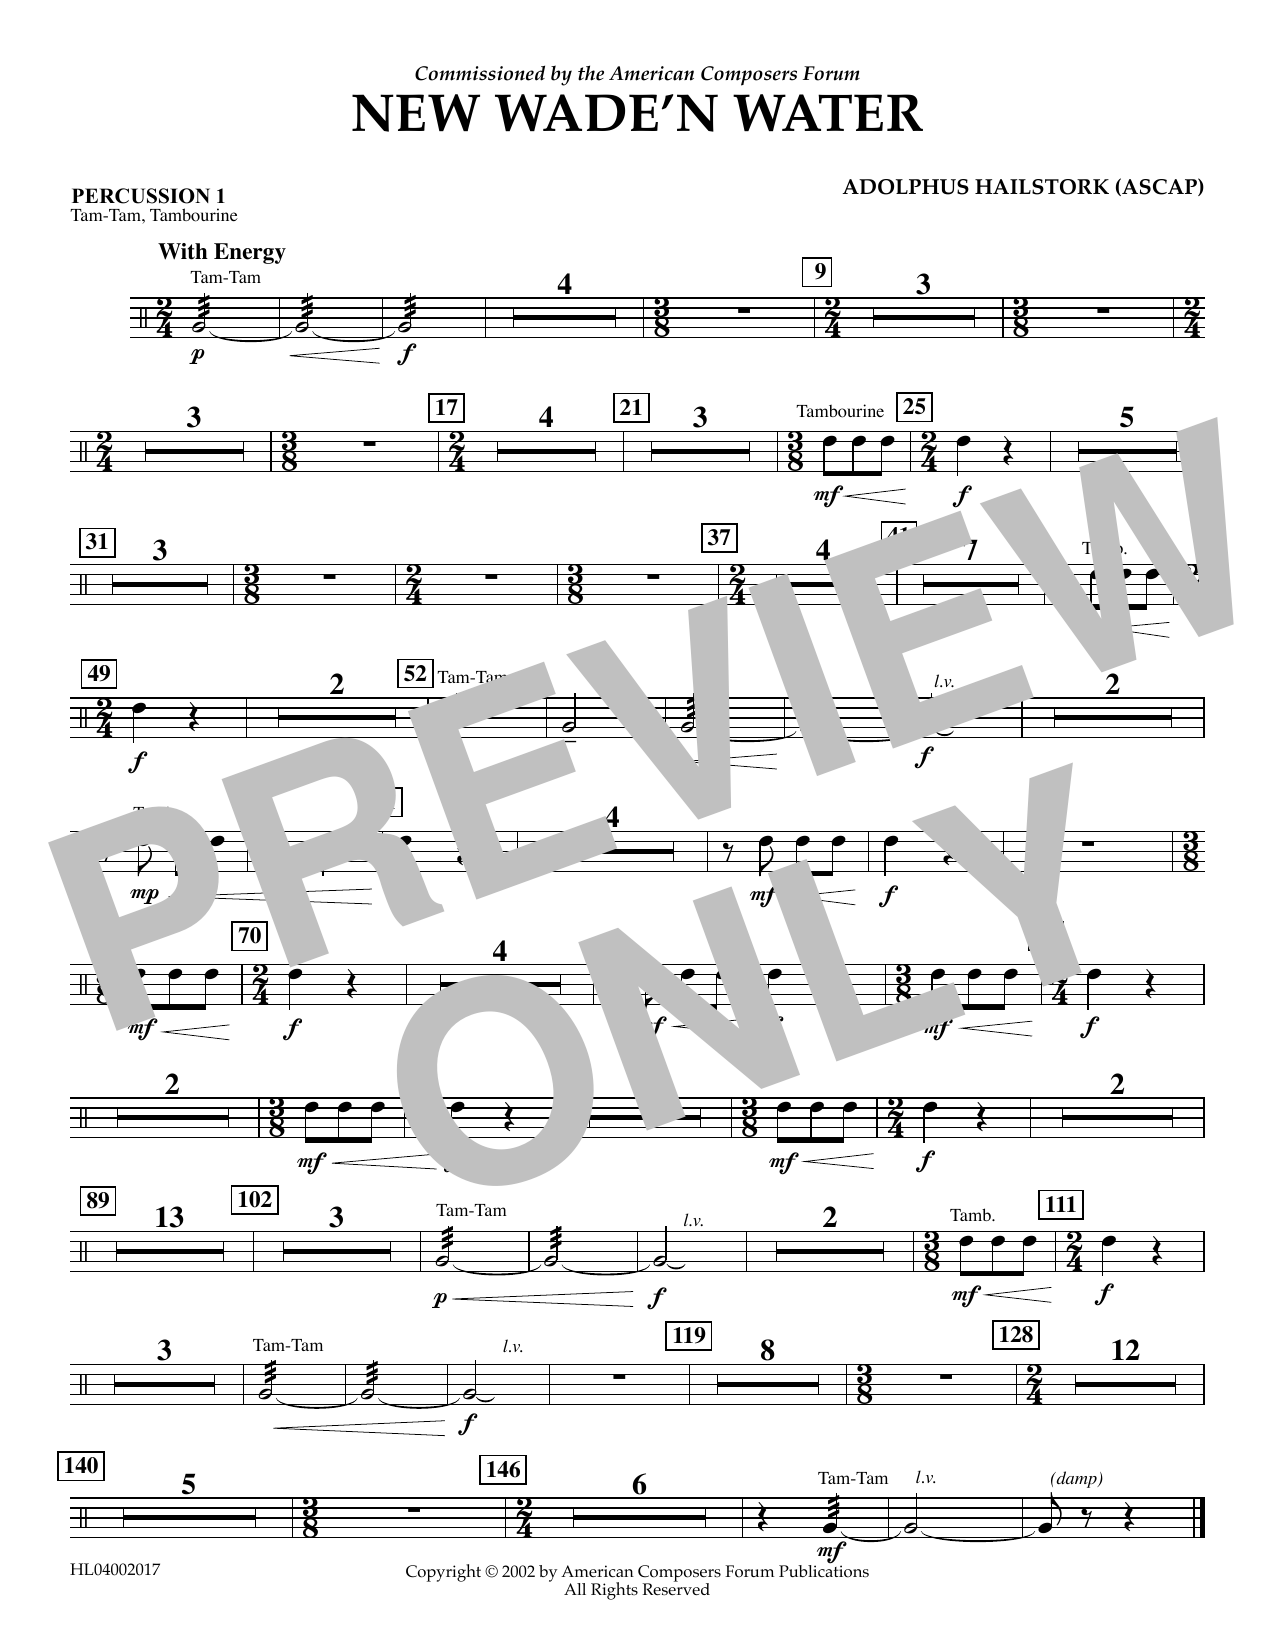 Download Adolphus Hailstork New Wade 'n Water - Percussion 1 Sheet Music